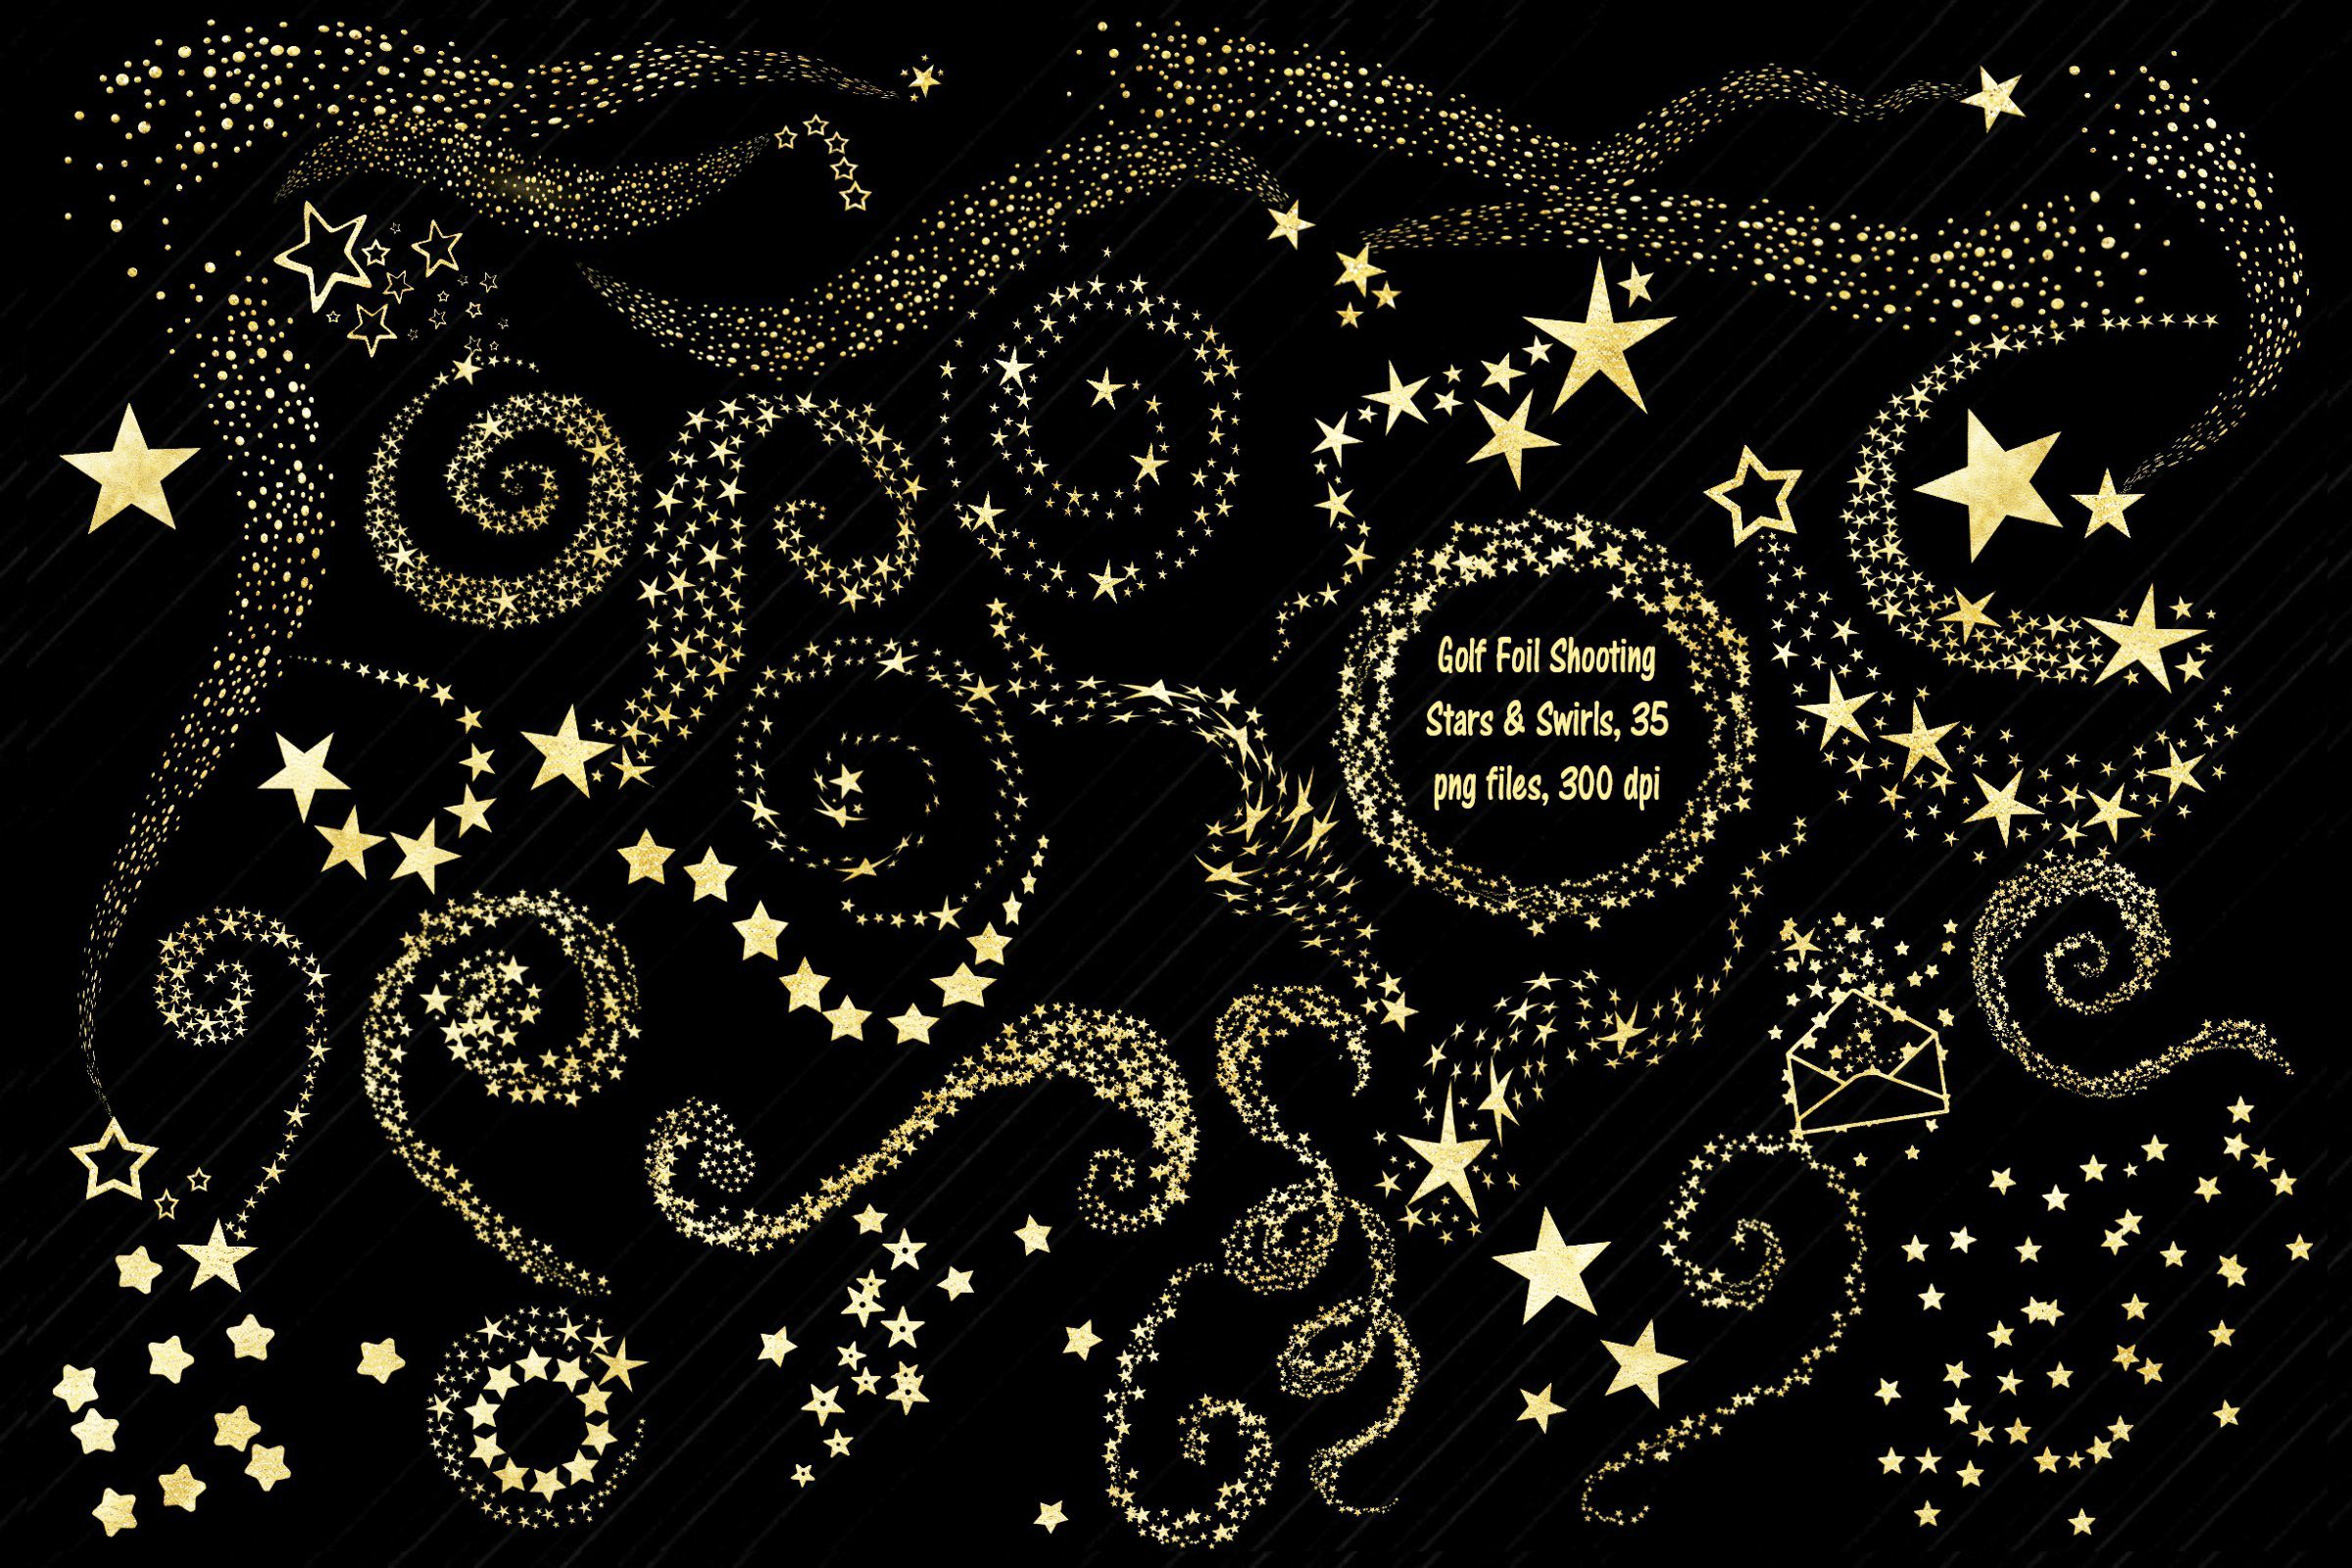 Gold Foil Swirls & Shooting Stars cover image.